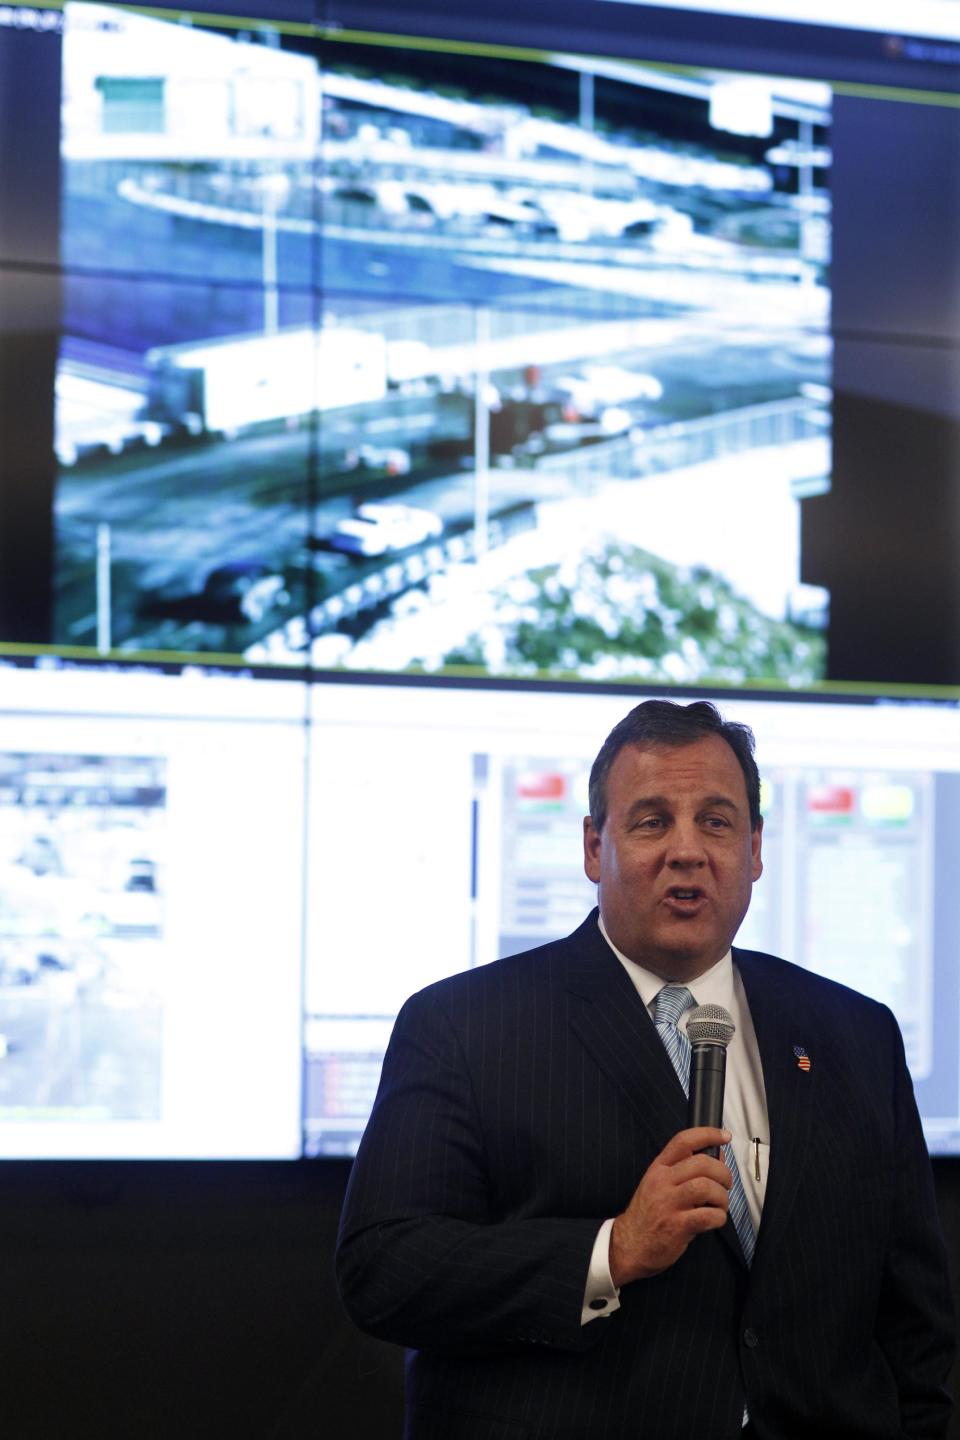 New Jersey Gov. Chris Christie speaks in front of large monitors as he visits the Super Bowl security operations center Wednesday, Jan. 29, 2014, in East Rutherford, N.J. (AP Photo/Mel Evans,pool)